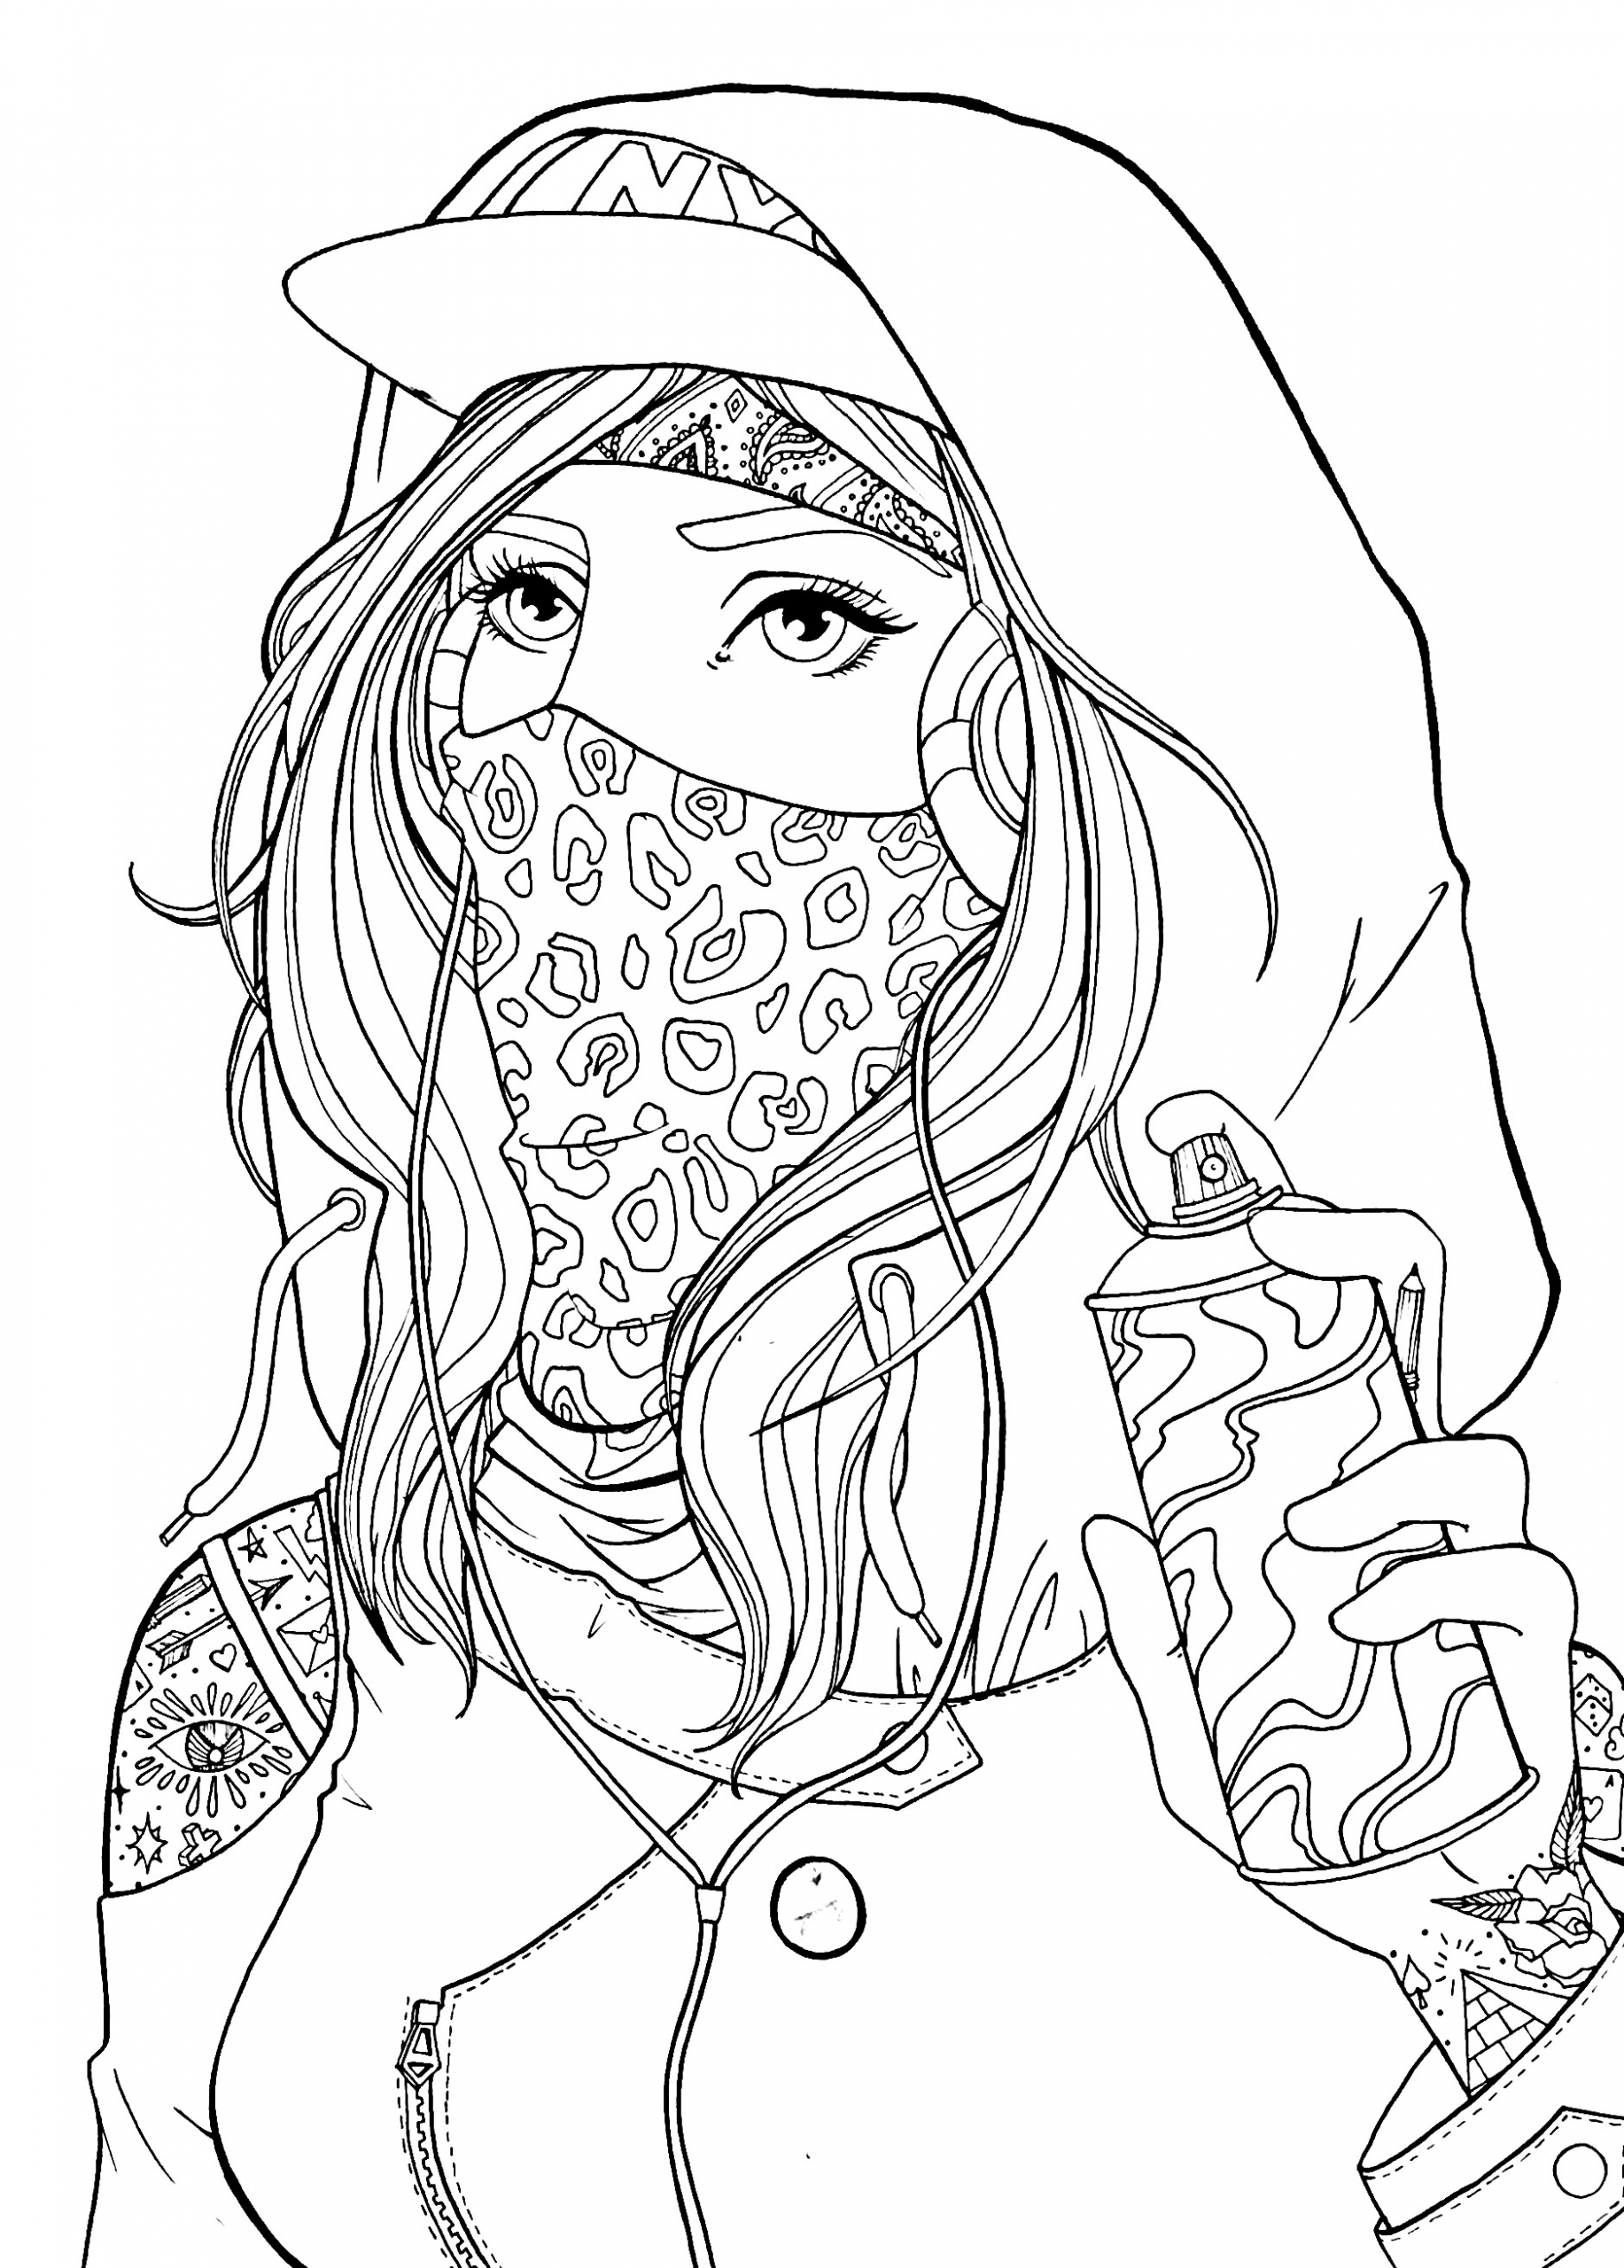 Coloring Book Pages For Girls
 Graffiti girl drawing lineart